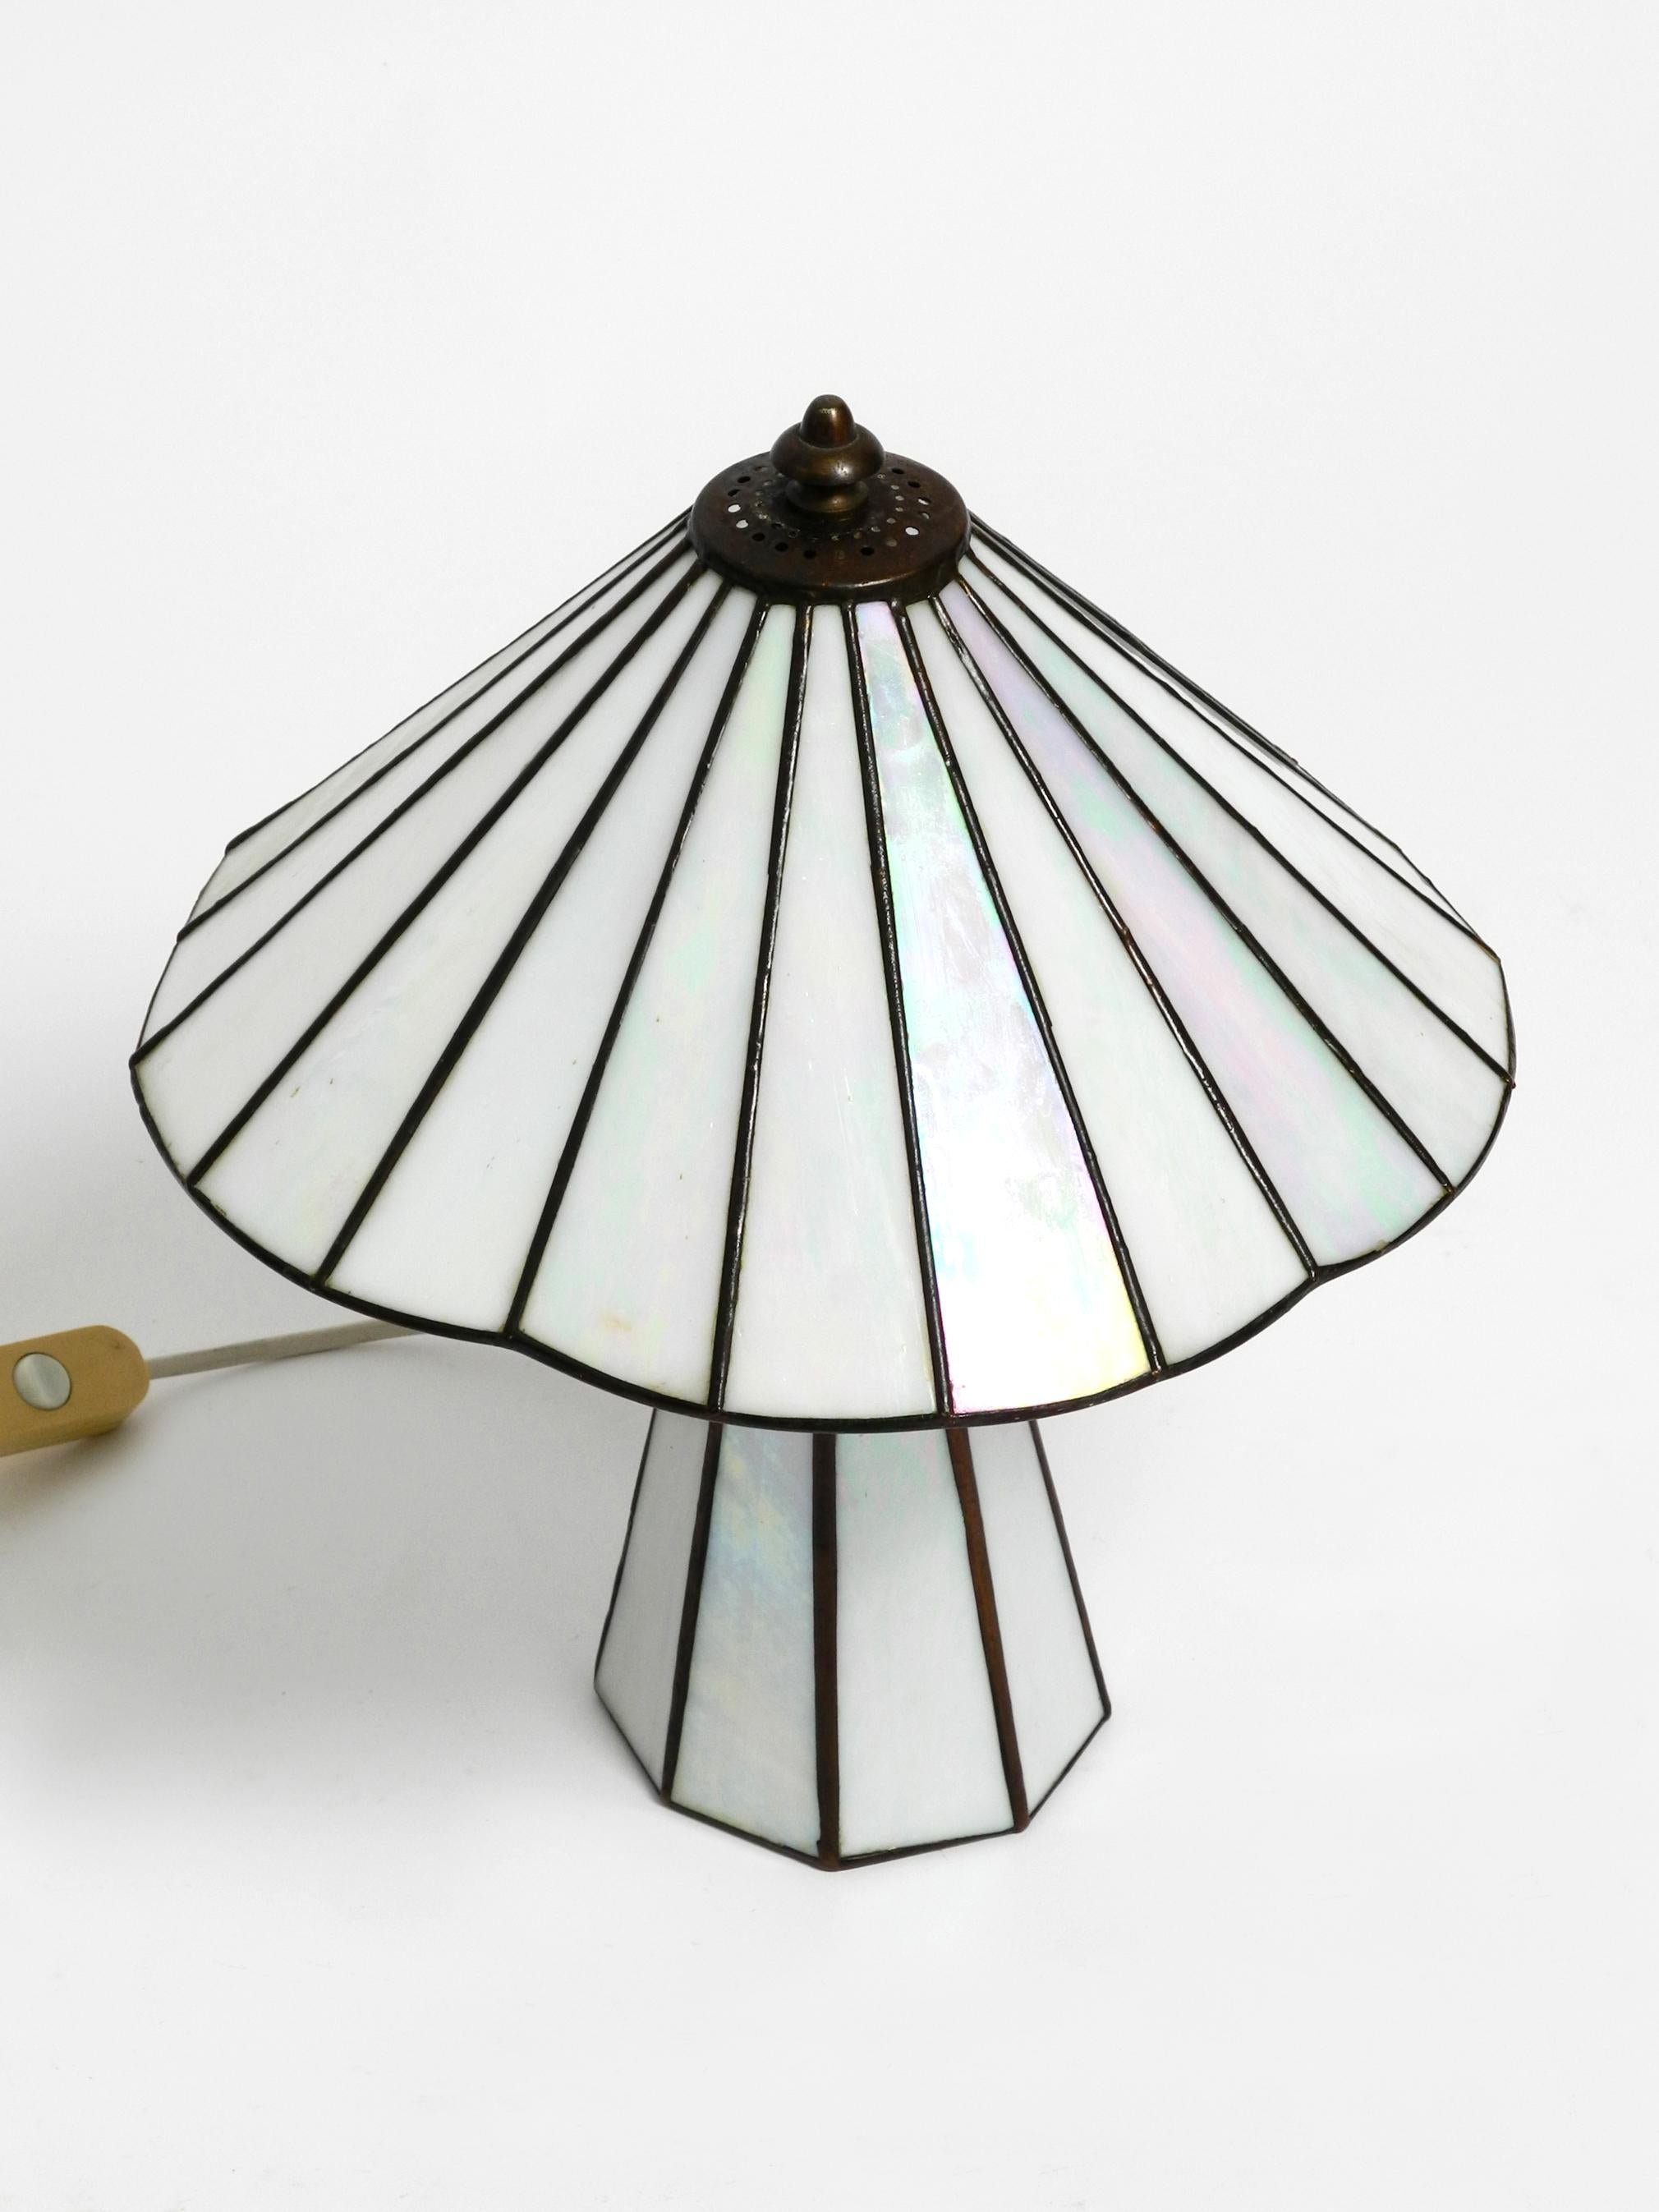 Regency Beautiful Little 70s Tiffany Design Table Lamp Made of Mother-of-pearl Glass